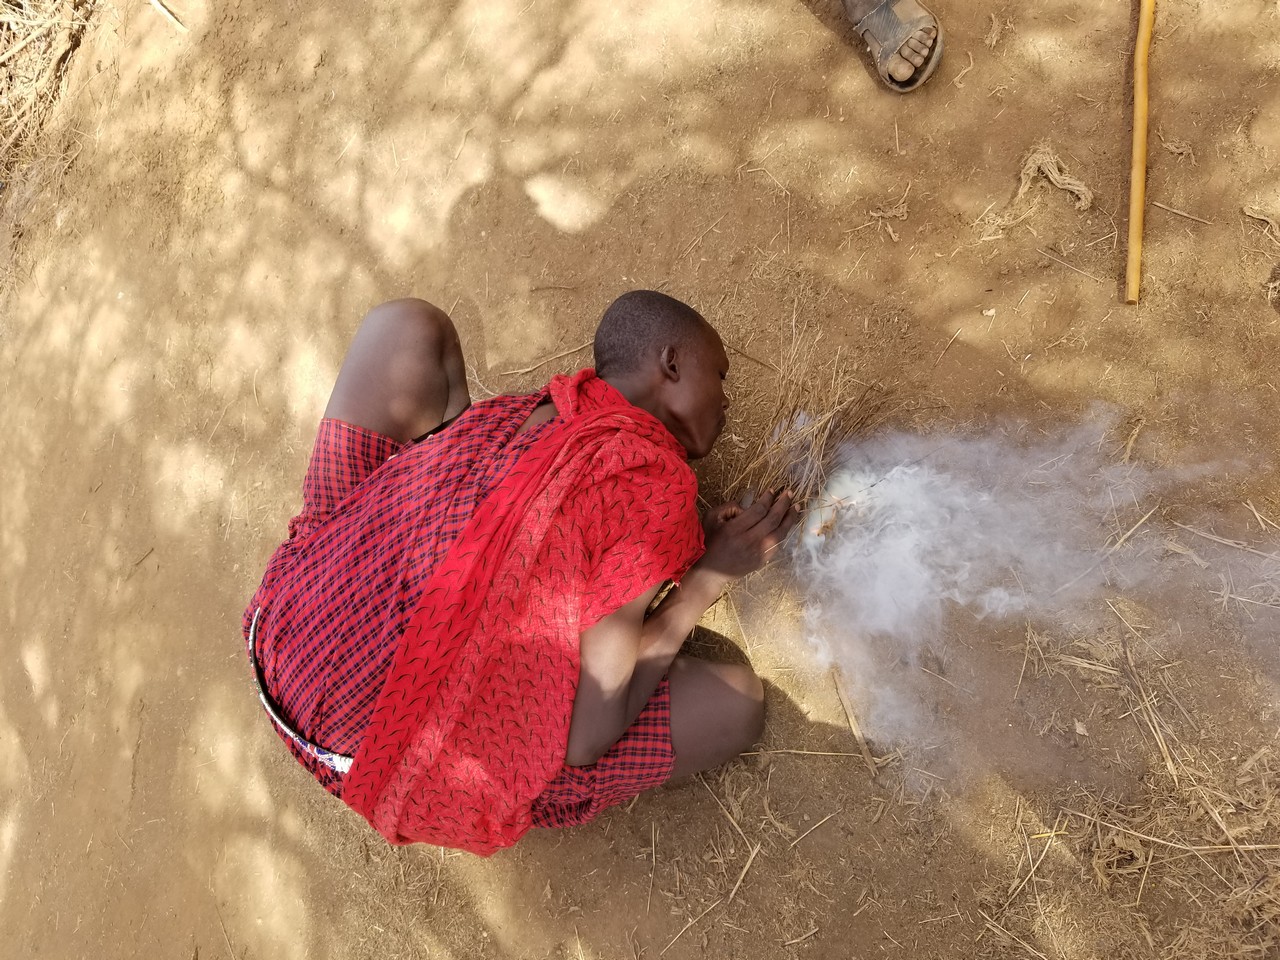 a man in a red dress kneeling on the ground with smoke